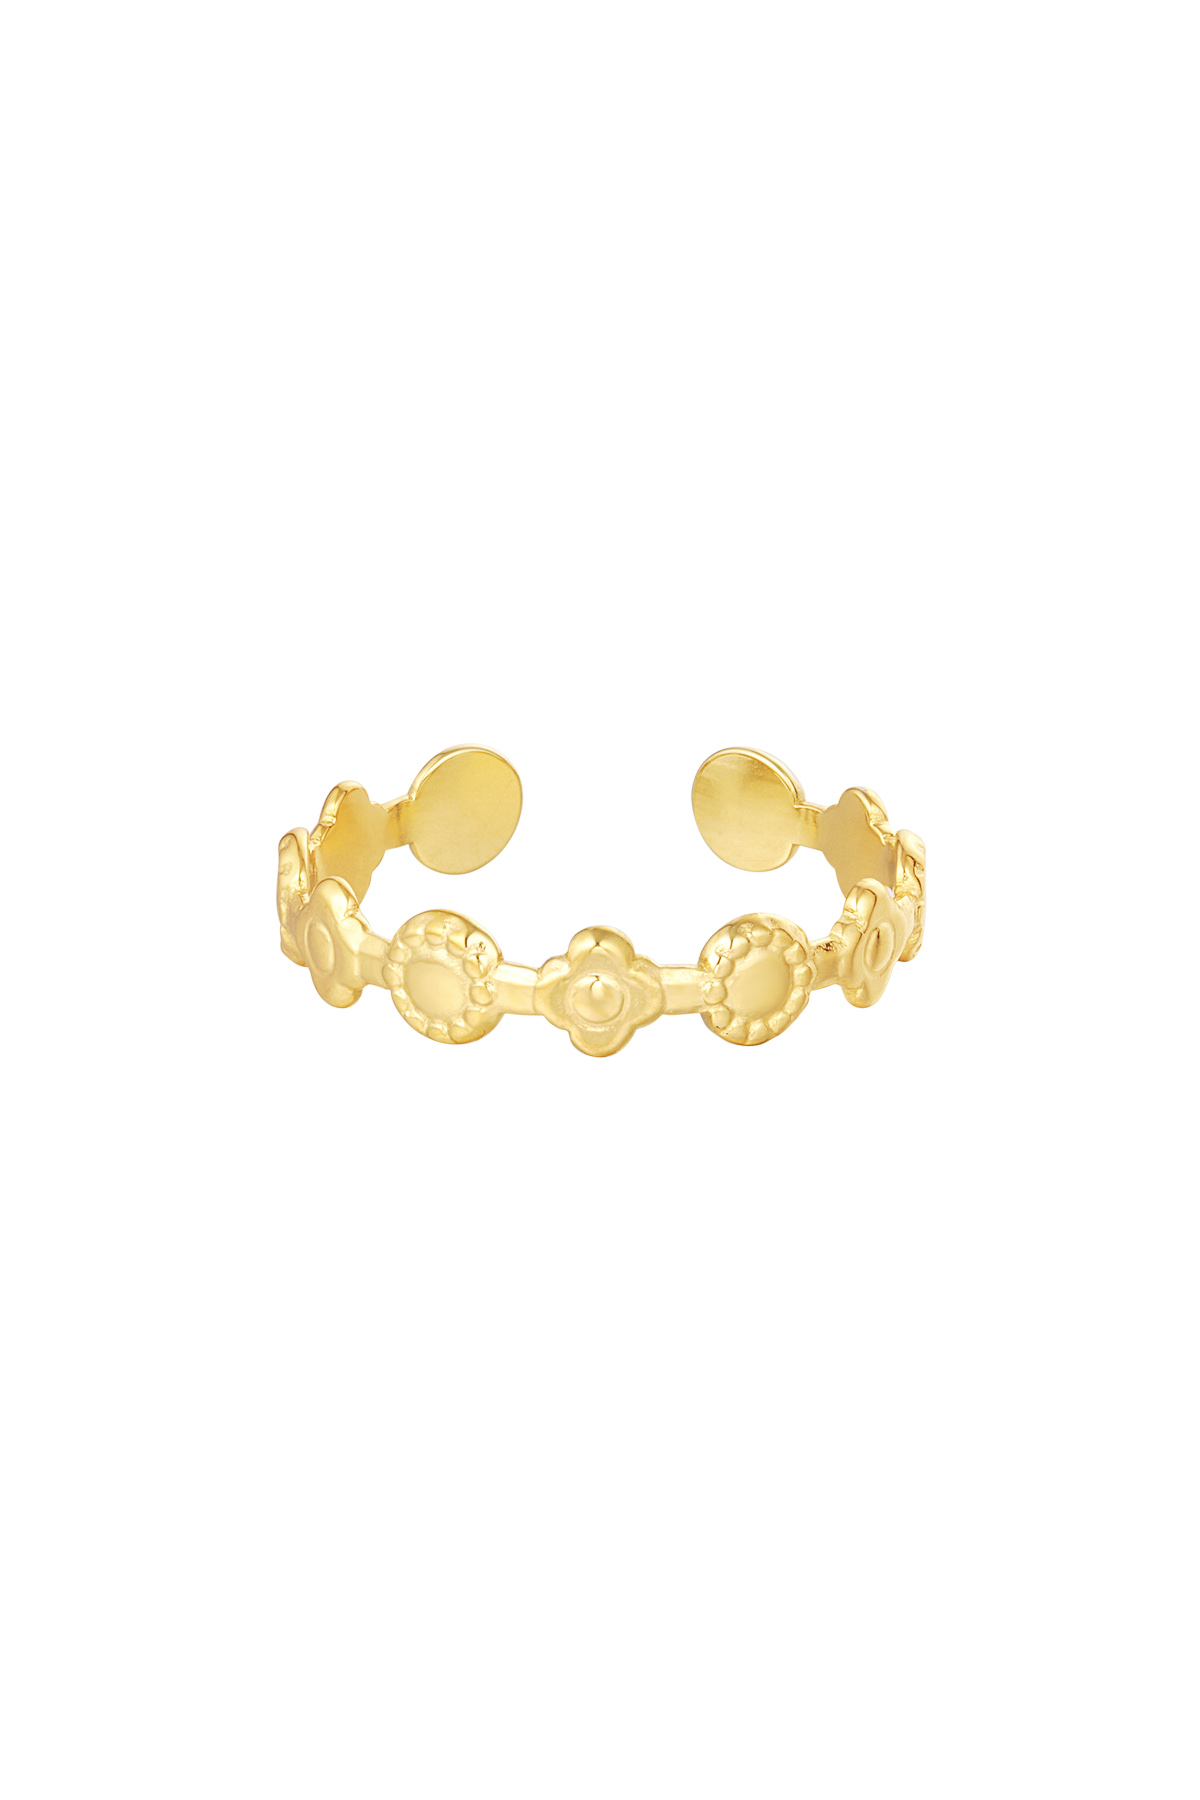 Ring flowers - gold h5 